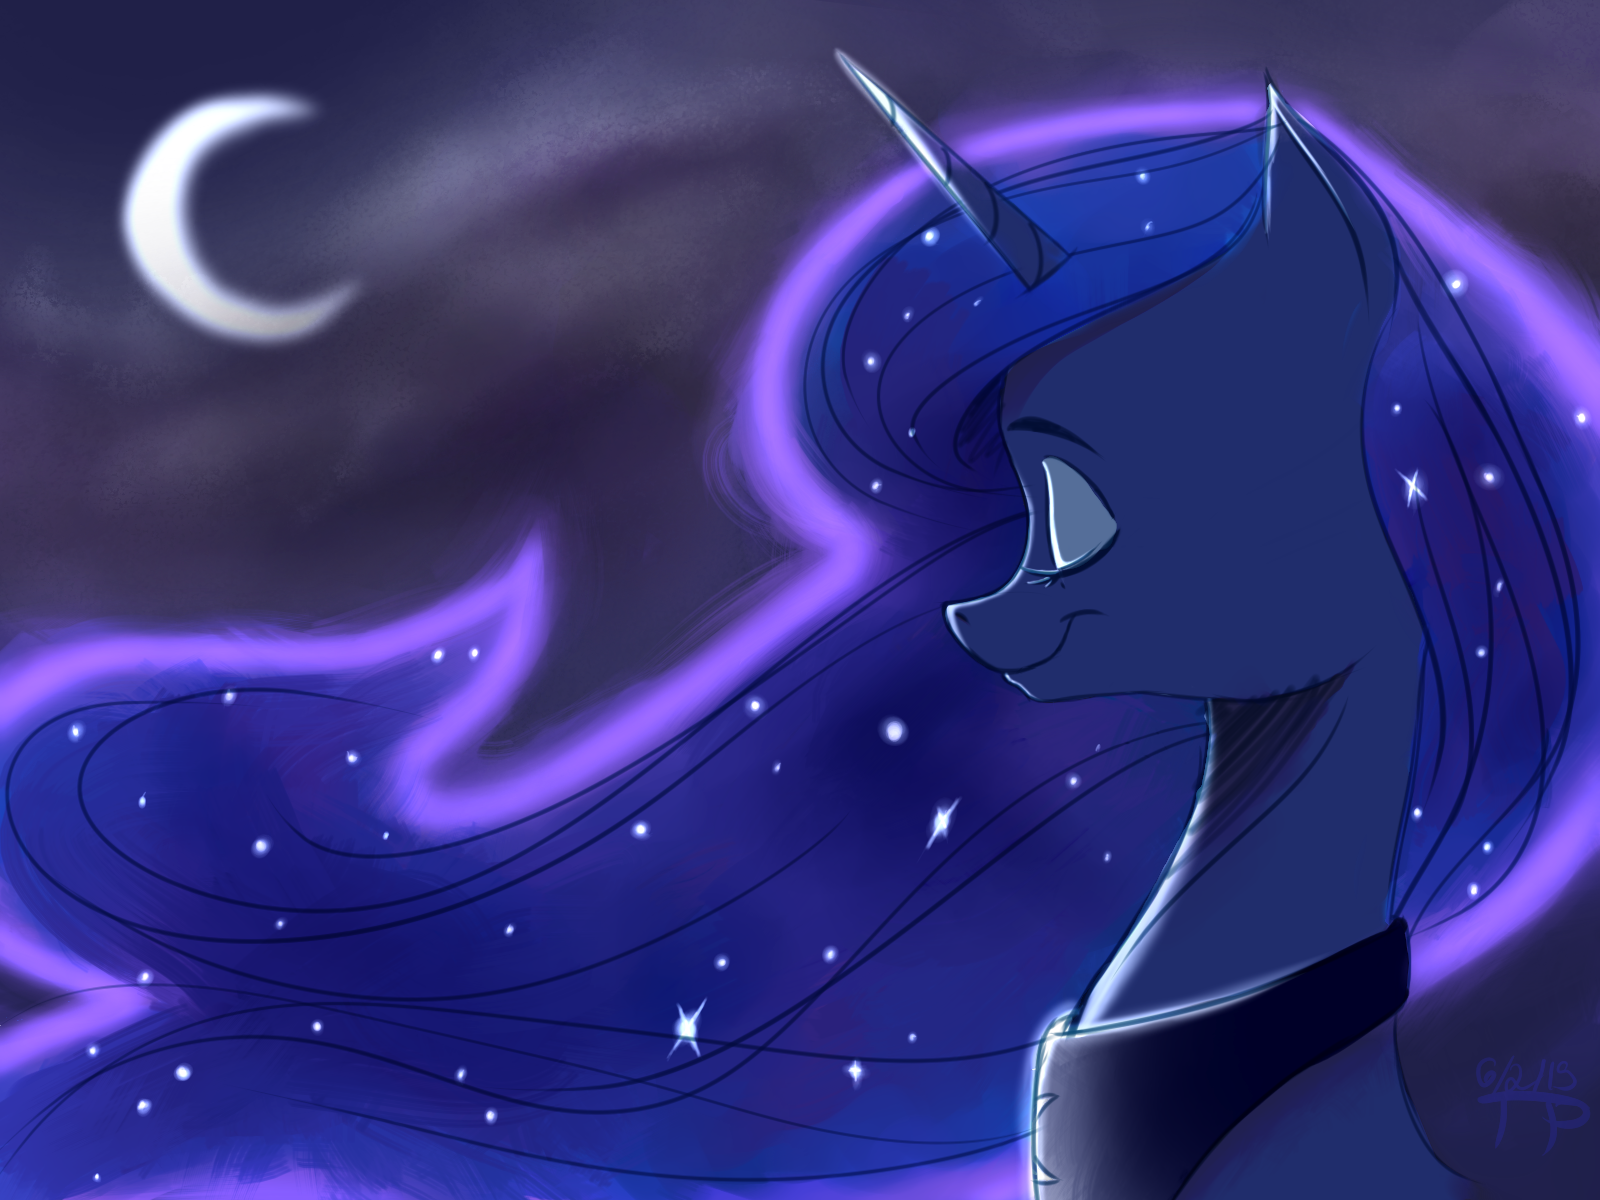 moonhoers_by_thethunderpony-da53p8h.png